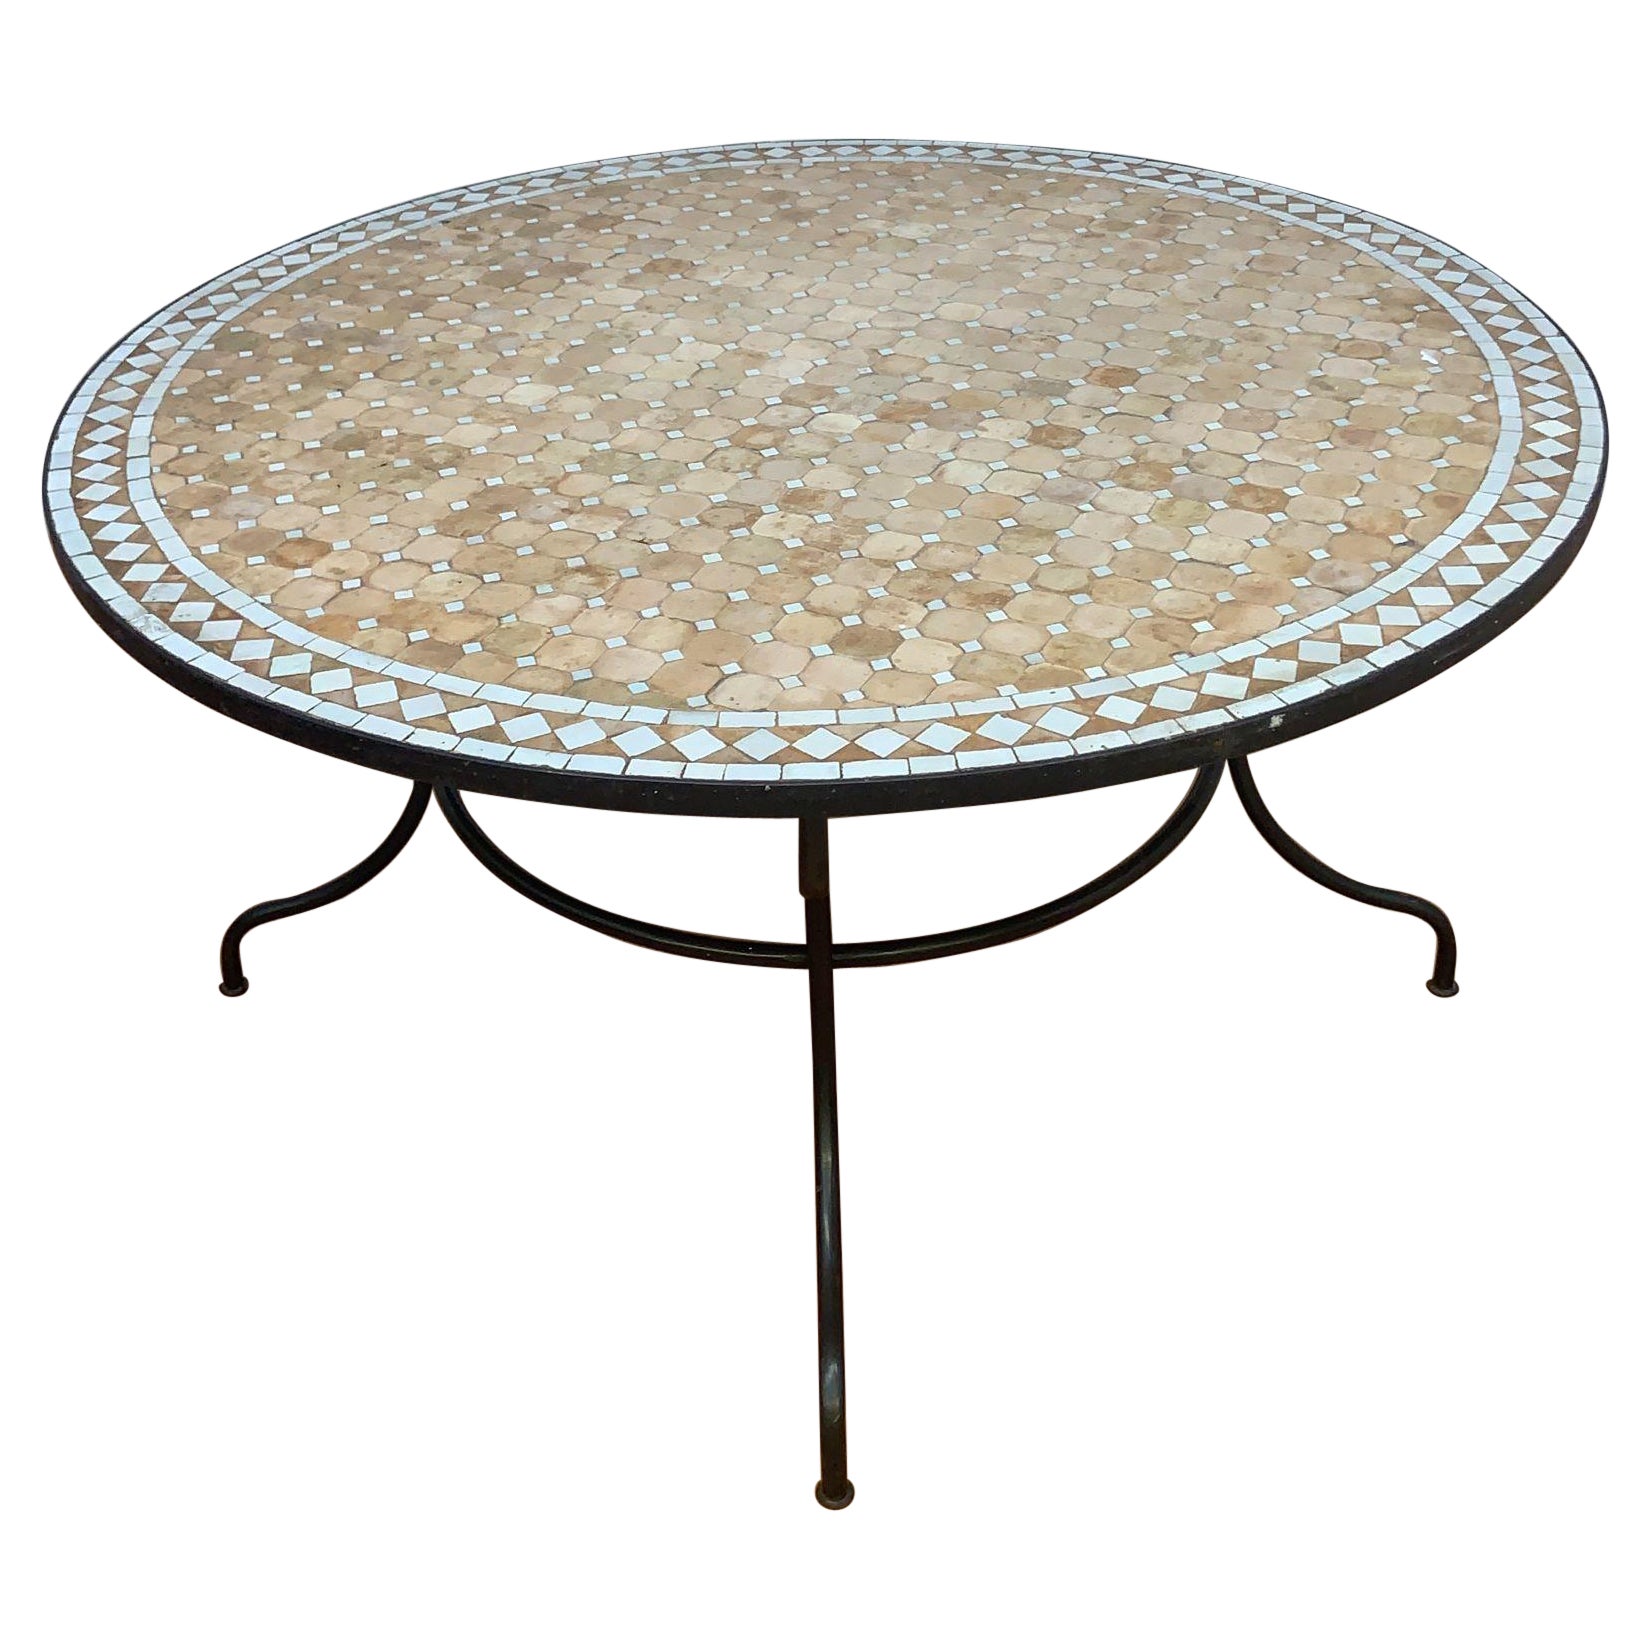 Vintage Moroccan Mosaic Tile Indoor/Outdoor Dining Table